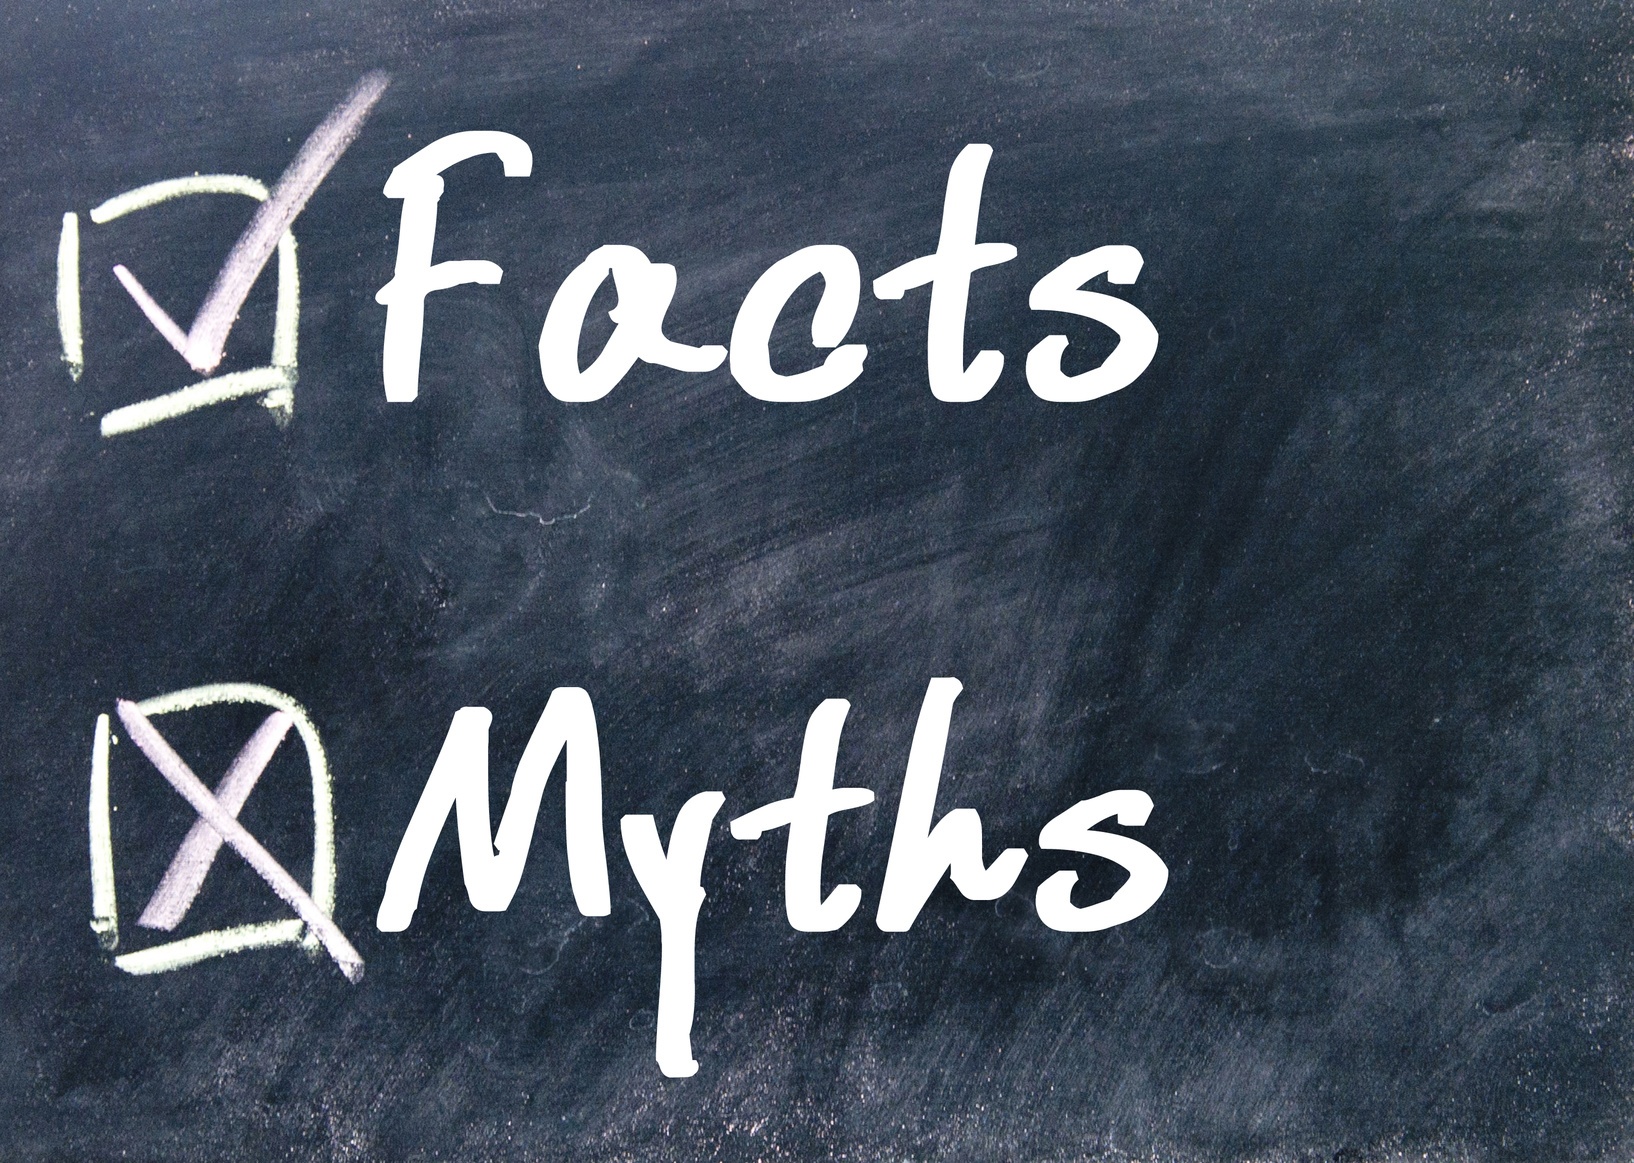 Web design myths that may wreck a havoc on your website